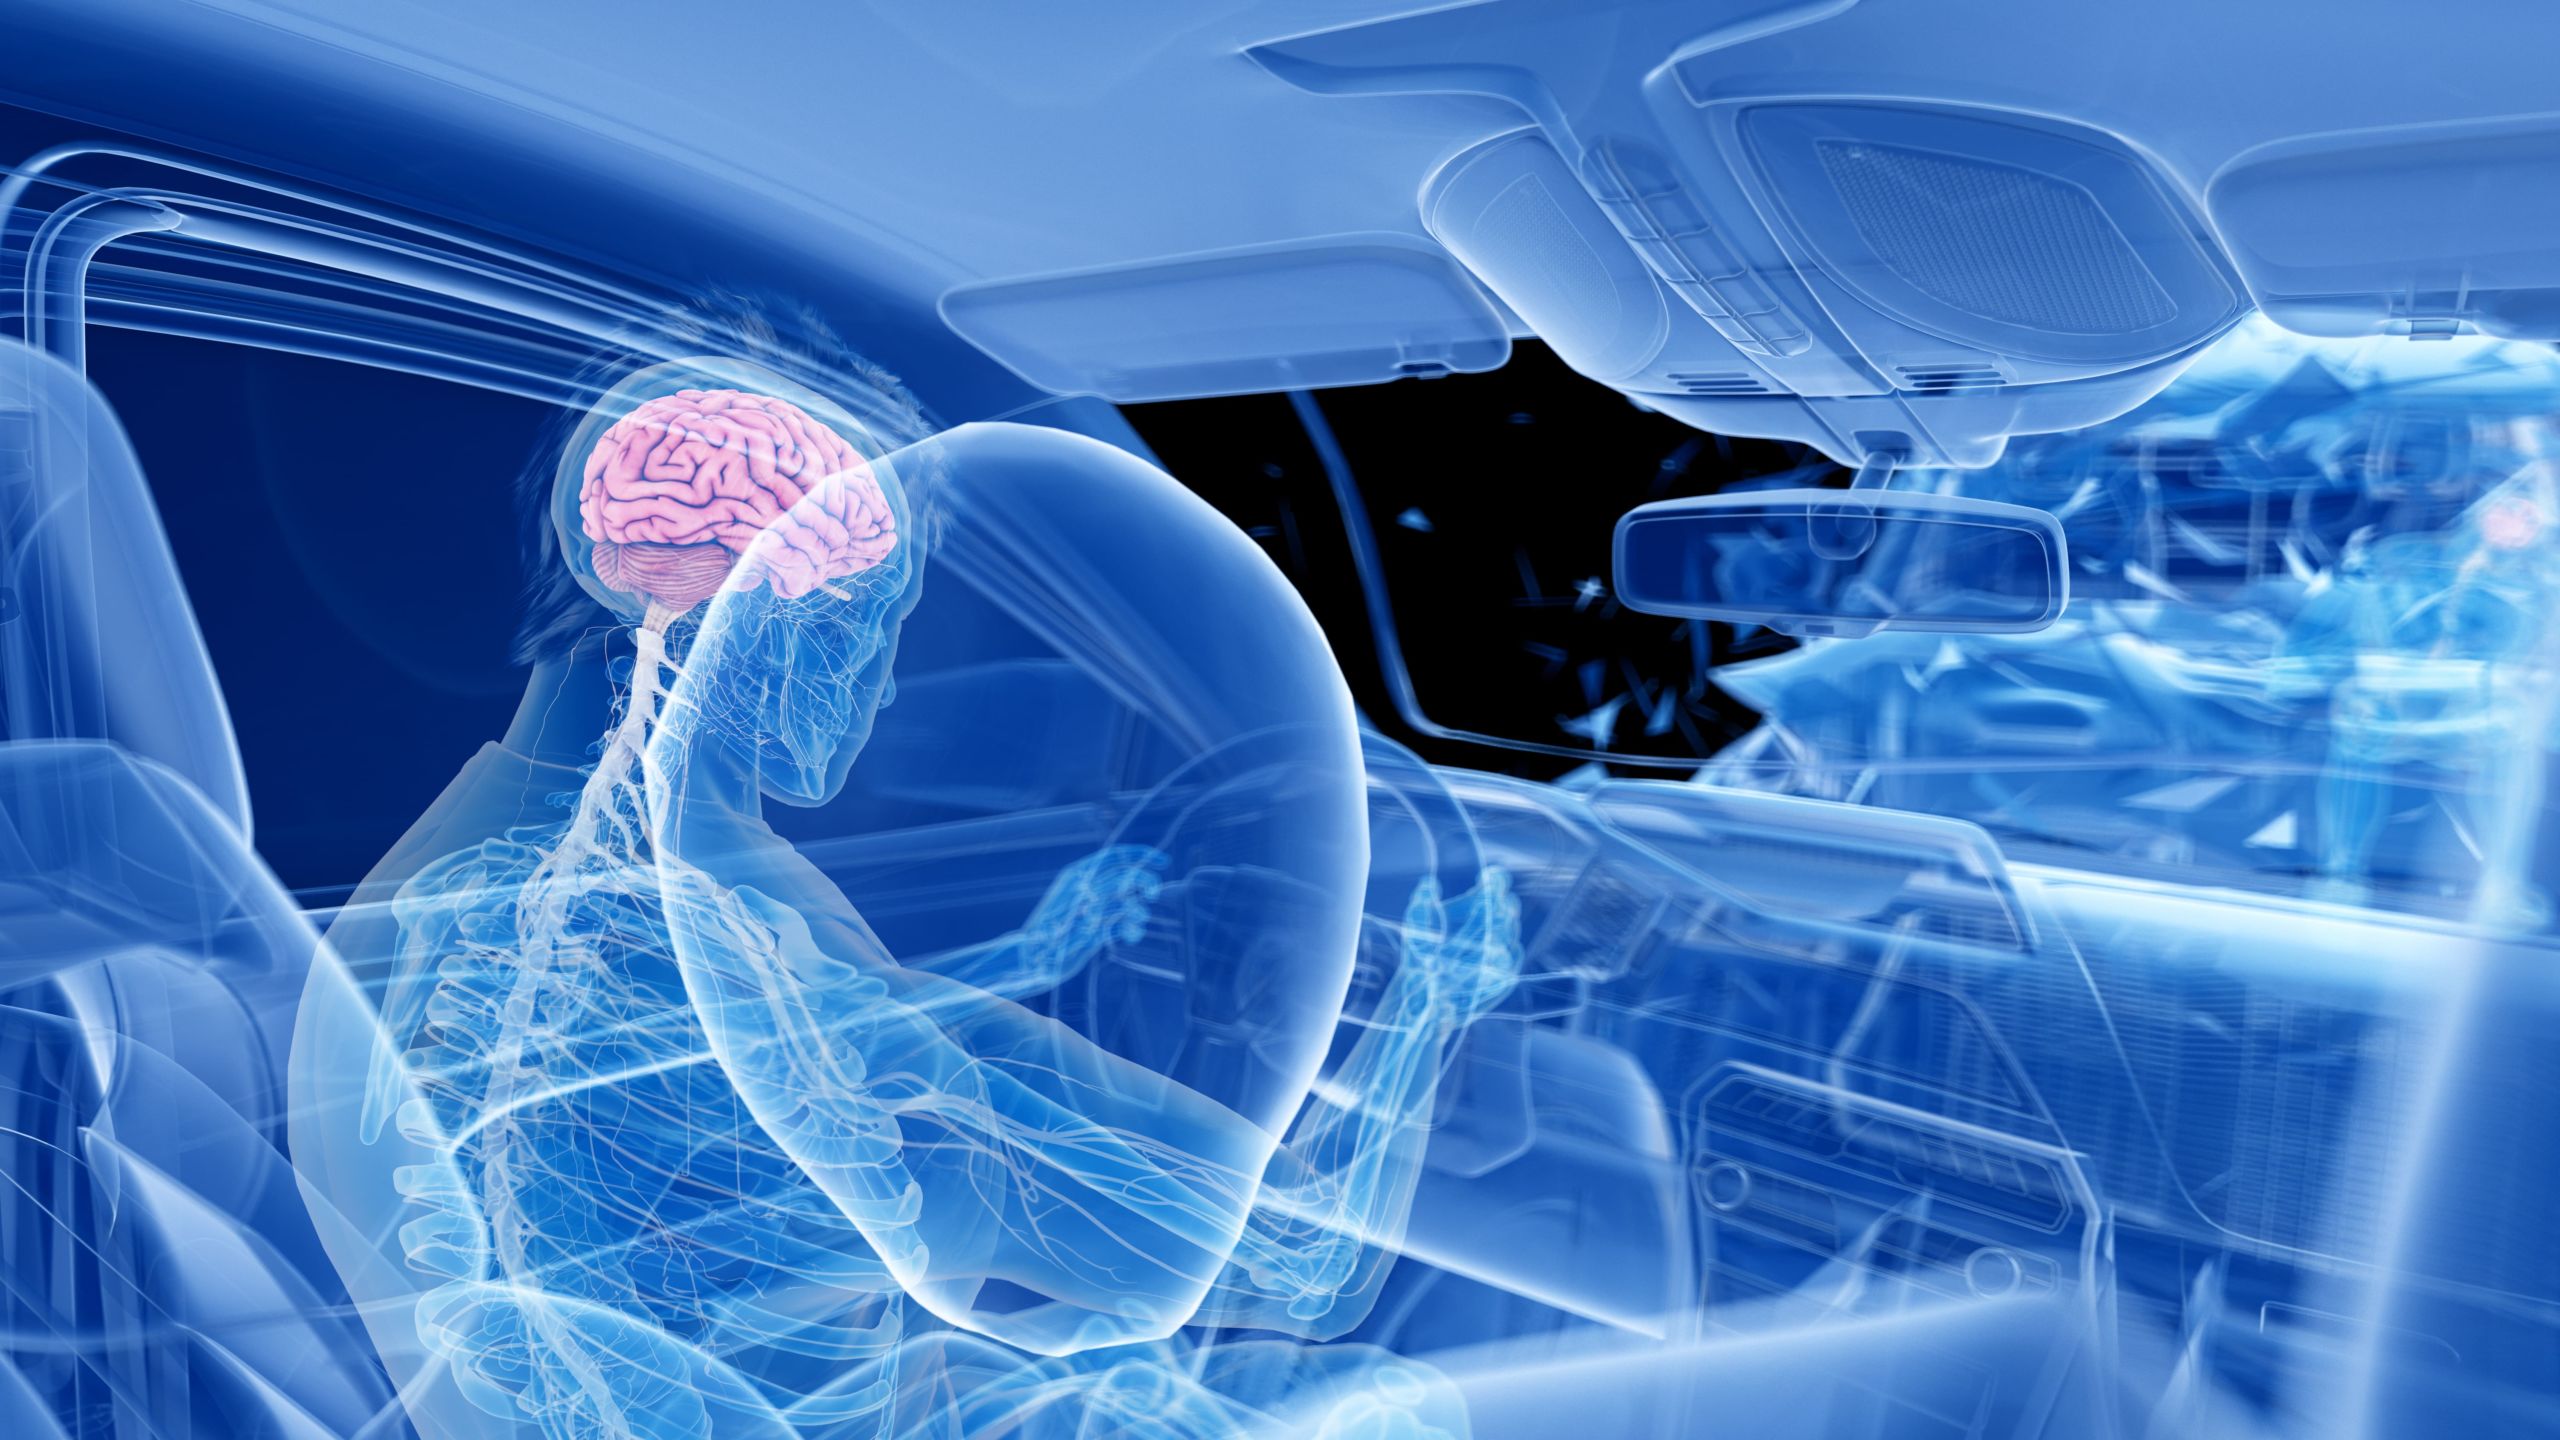 Our Florida Car Accident Traumatic Brain Injury Attorneys work to obtain full monetary compensation for our clients.